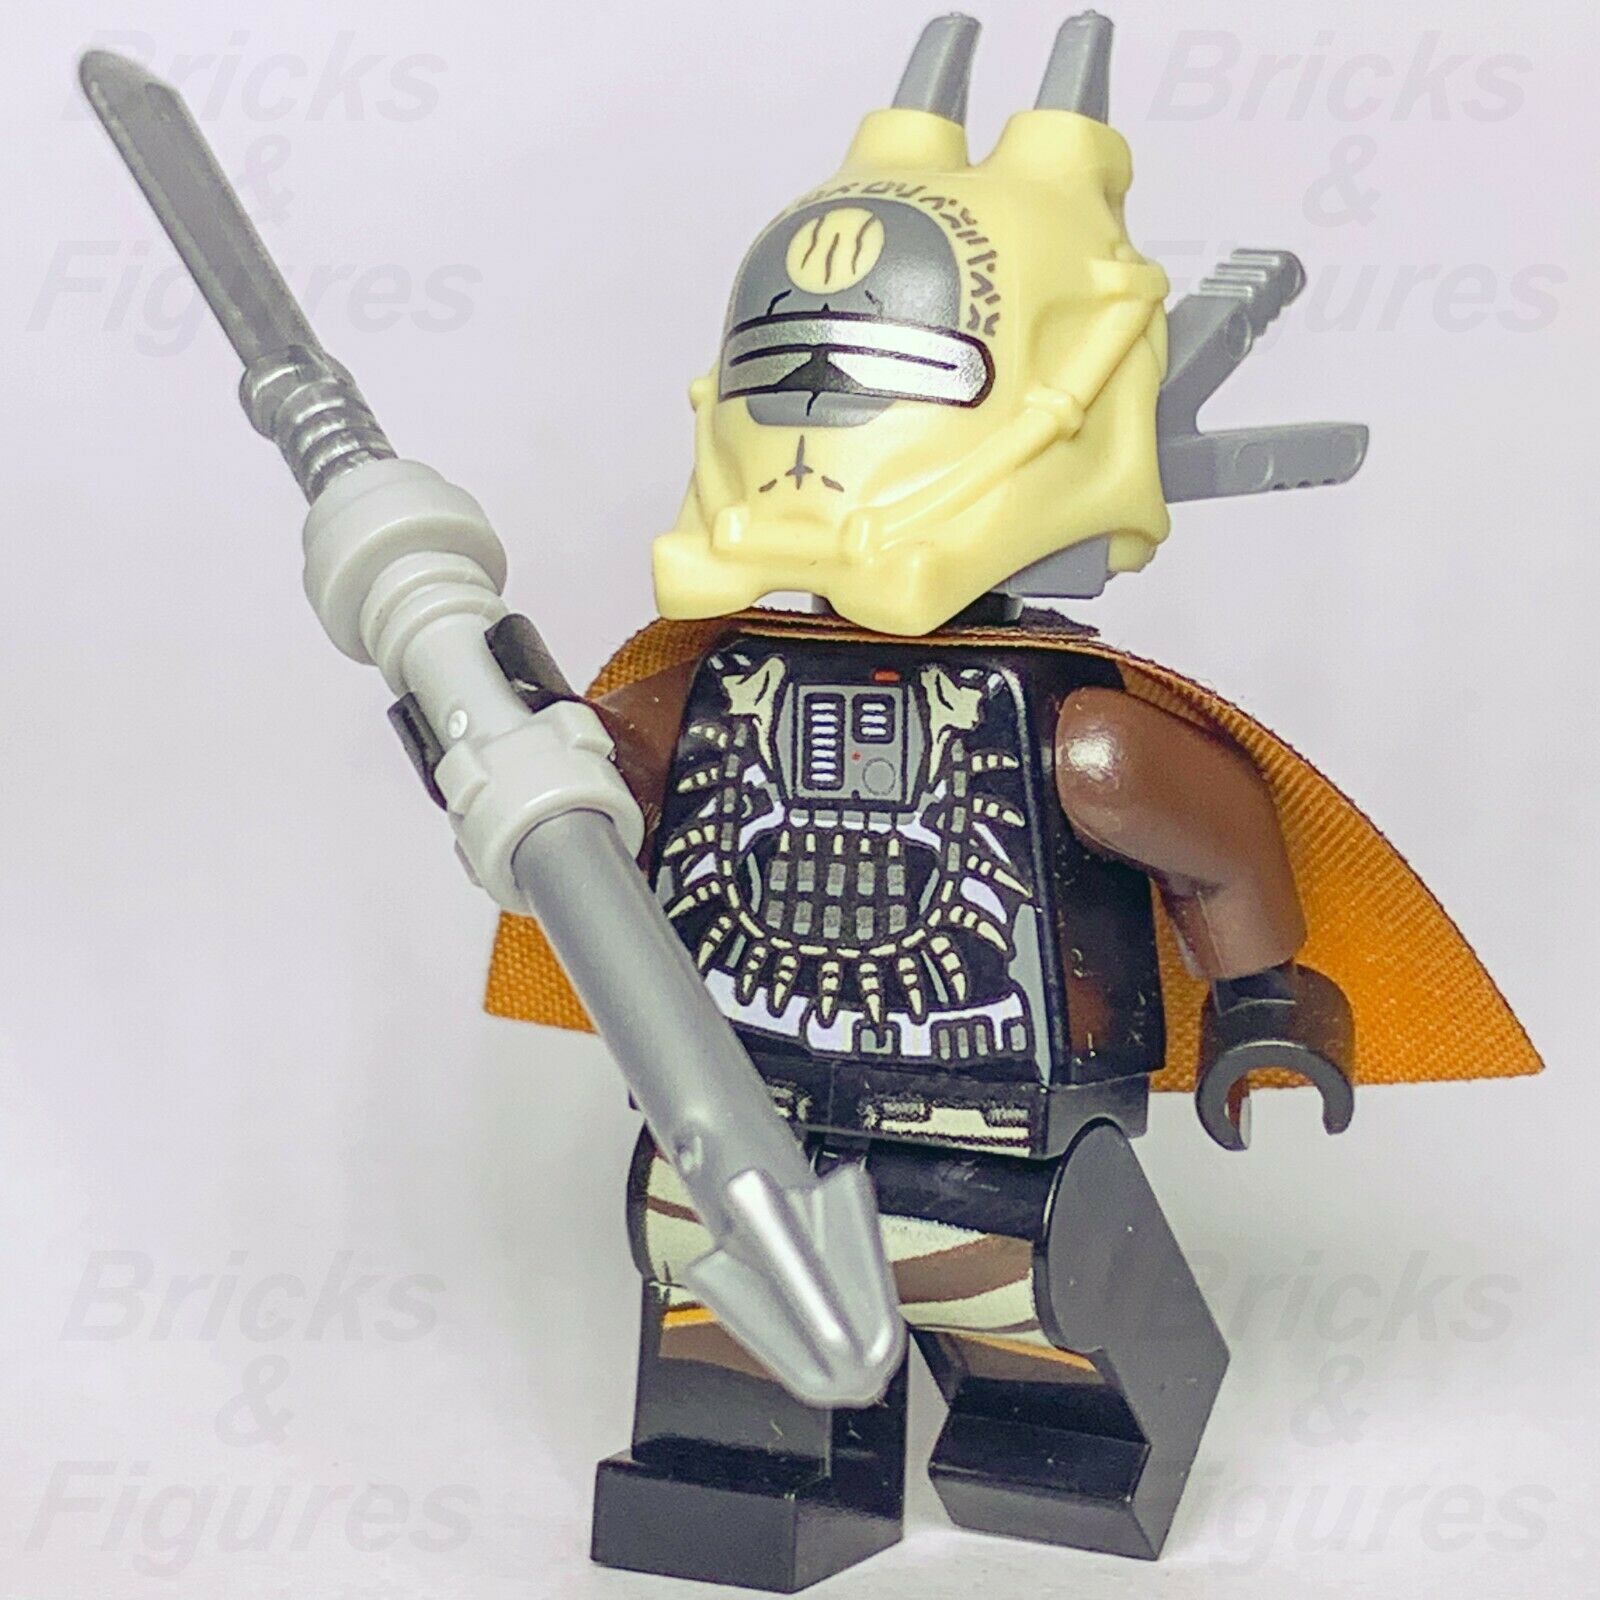 New Star Wars LEGO Enfys Nest Resistance Fighter Minifigure from Solo Set 75215 - Bricks & Figures